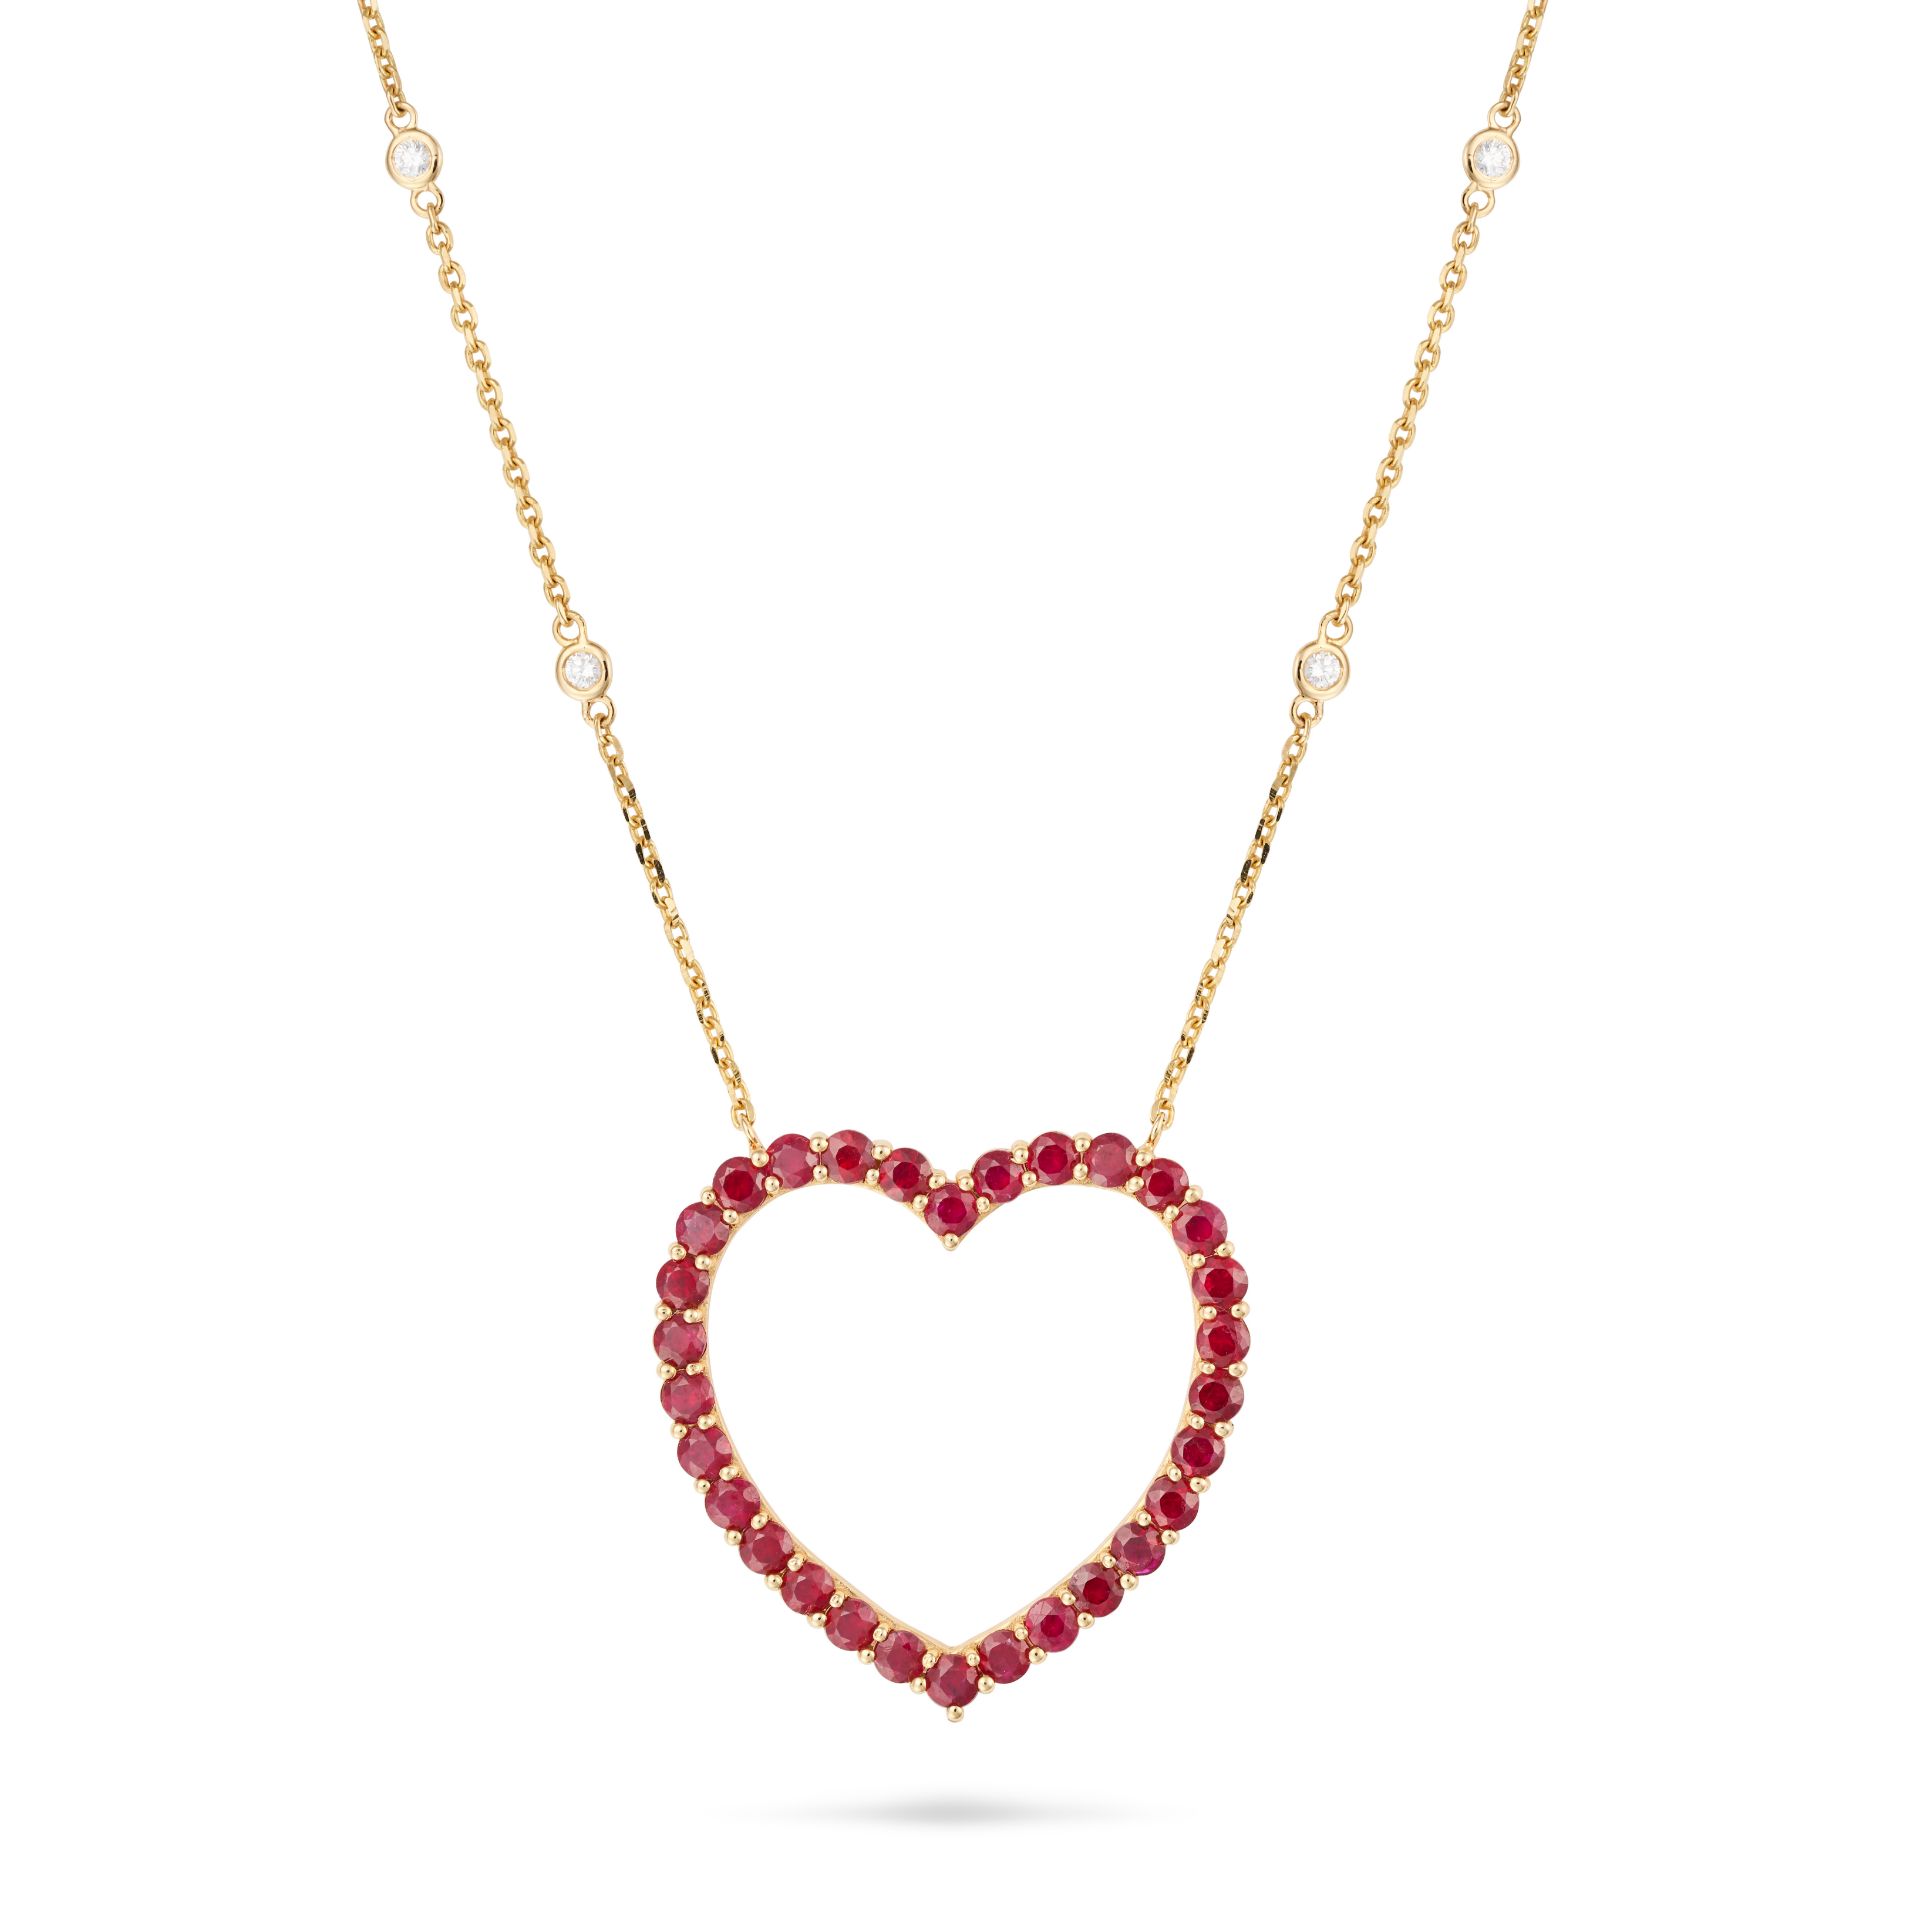 A RUBY AND DIAMOND HEART PENDANT NECKLACE the pendant designed as an openwork heart set with roun...